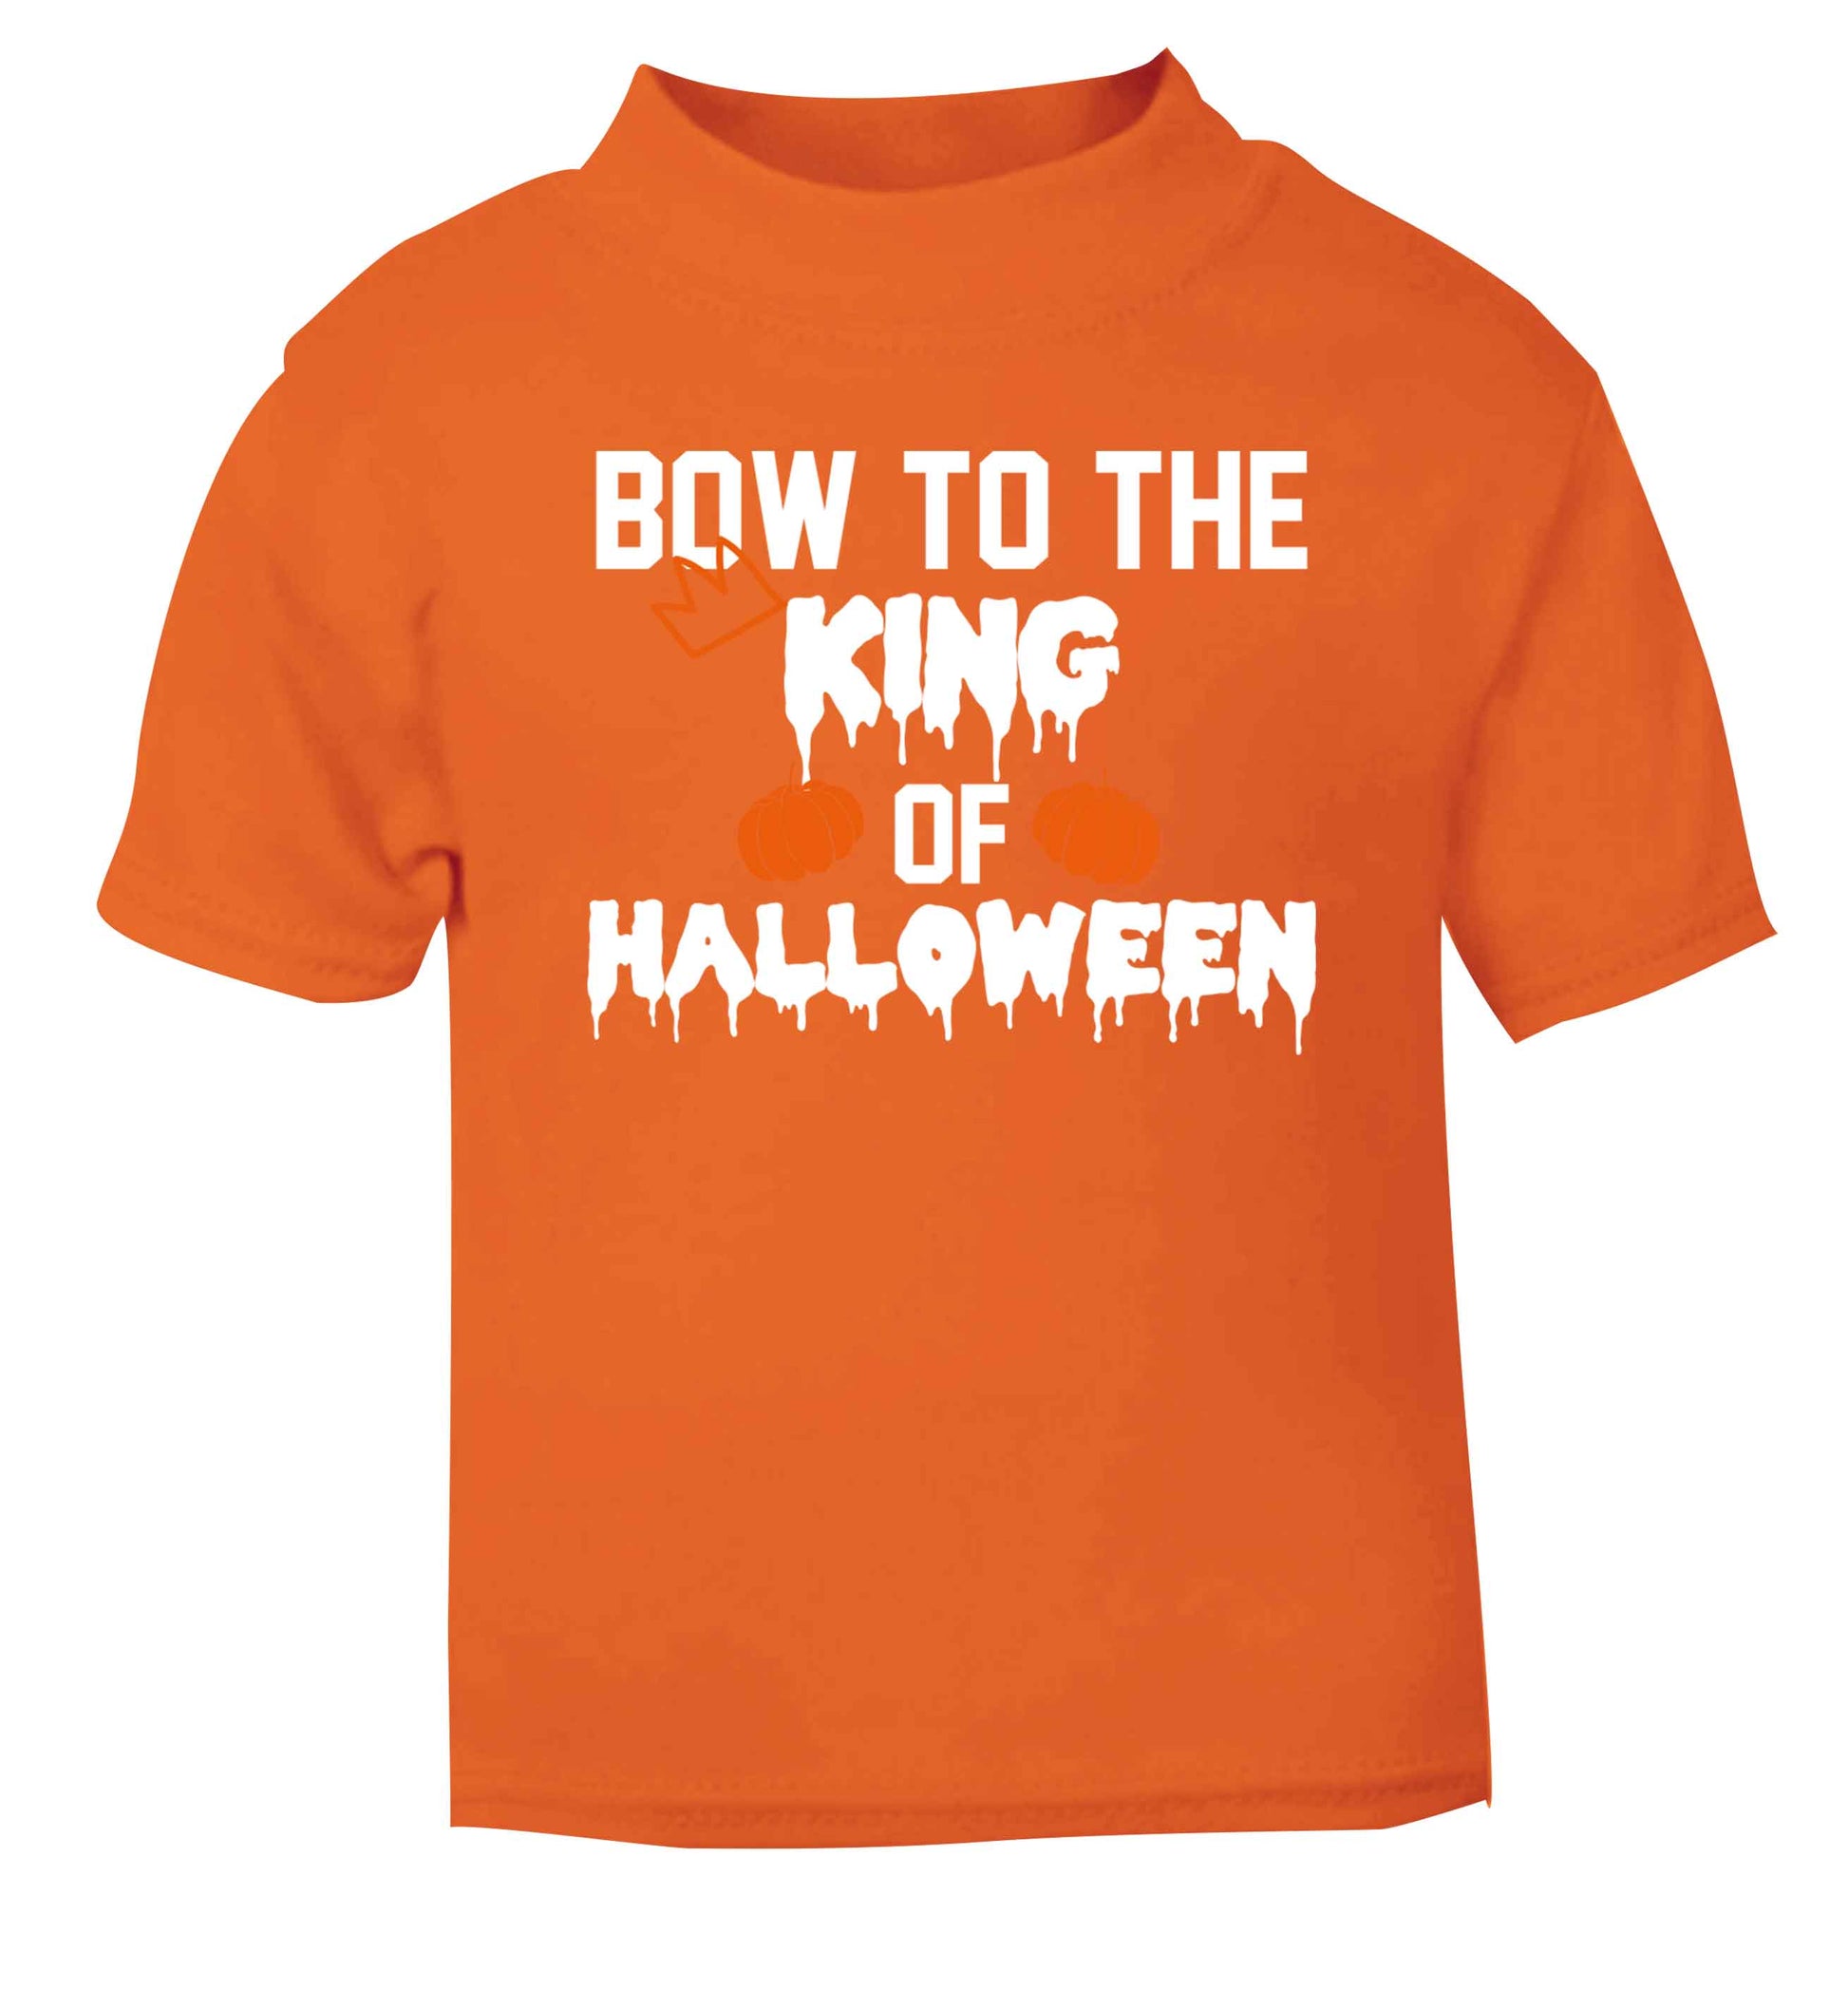 Bow to the King of halloween orange baby toddler Tshirt 2 Years